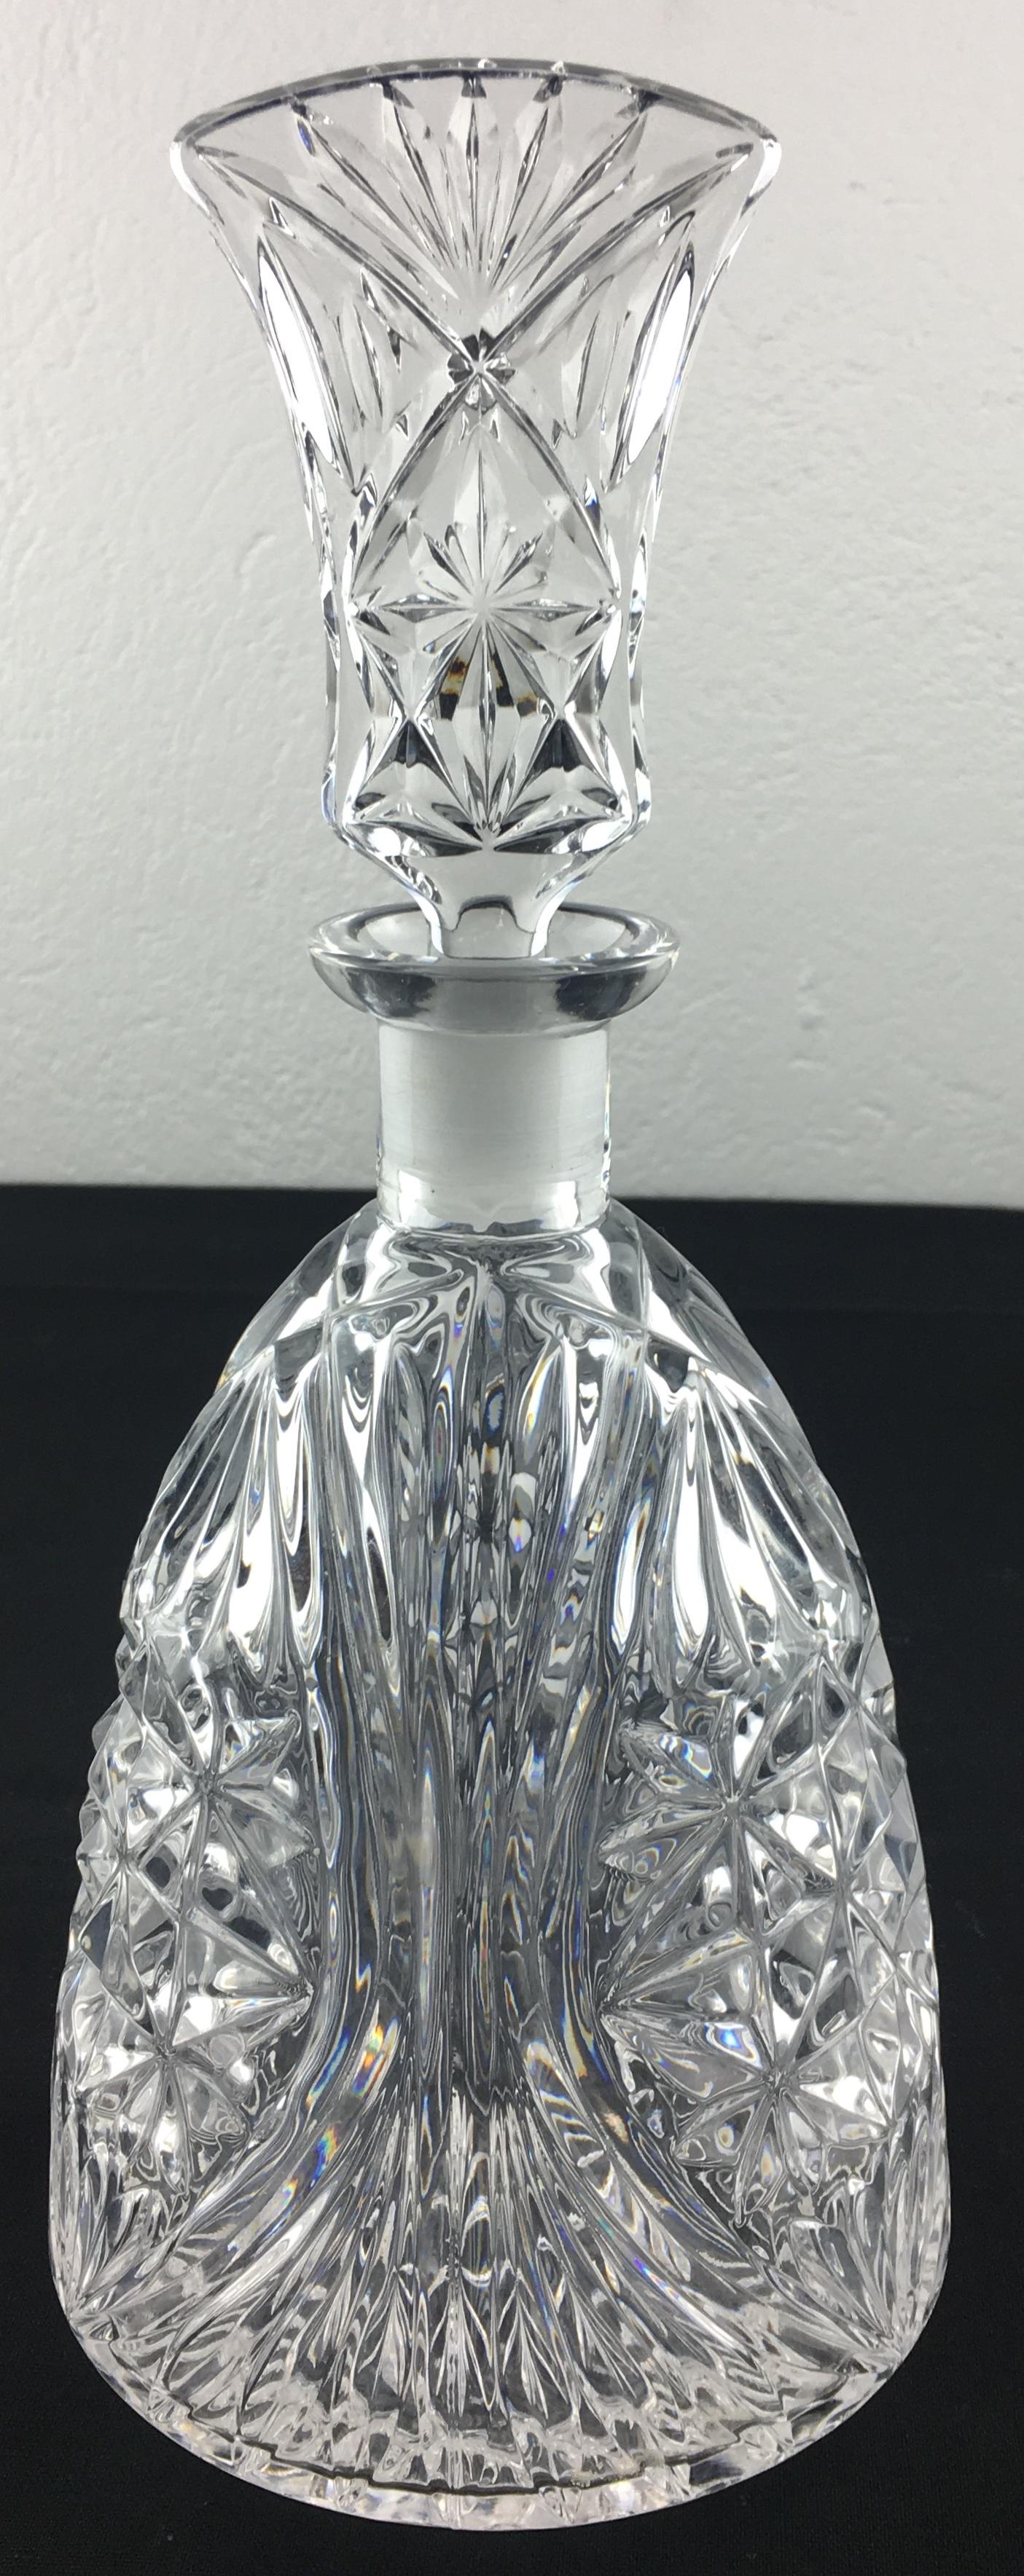 Exquisite Baccarat handcut crystal decanter with original bouchon and six liquor shot glasses. The liquor glasses were originally used for consuming calva from the Normandy region. However, they are perfect for any liquor of choice consumed in small